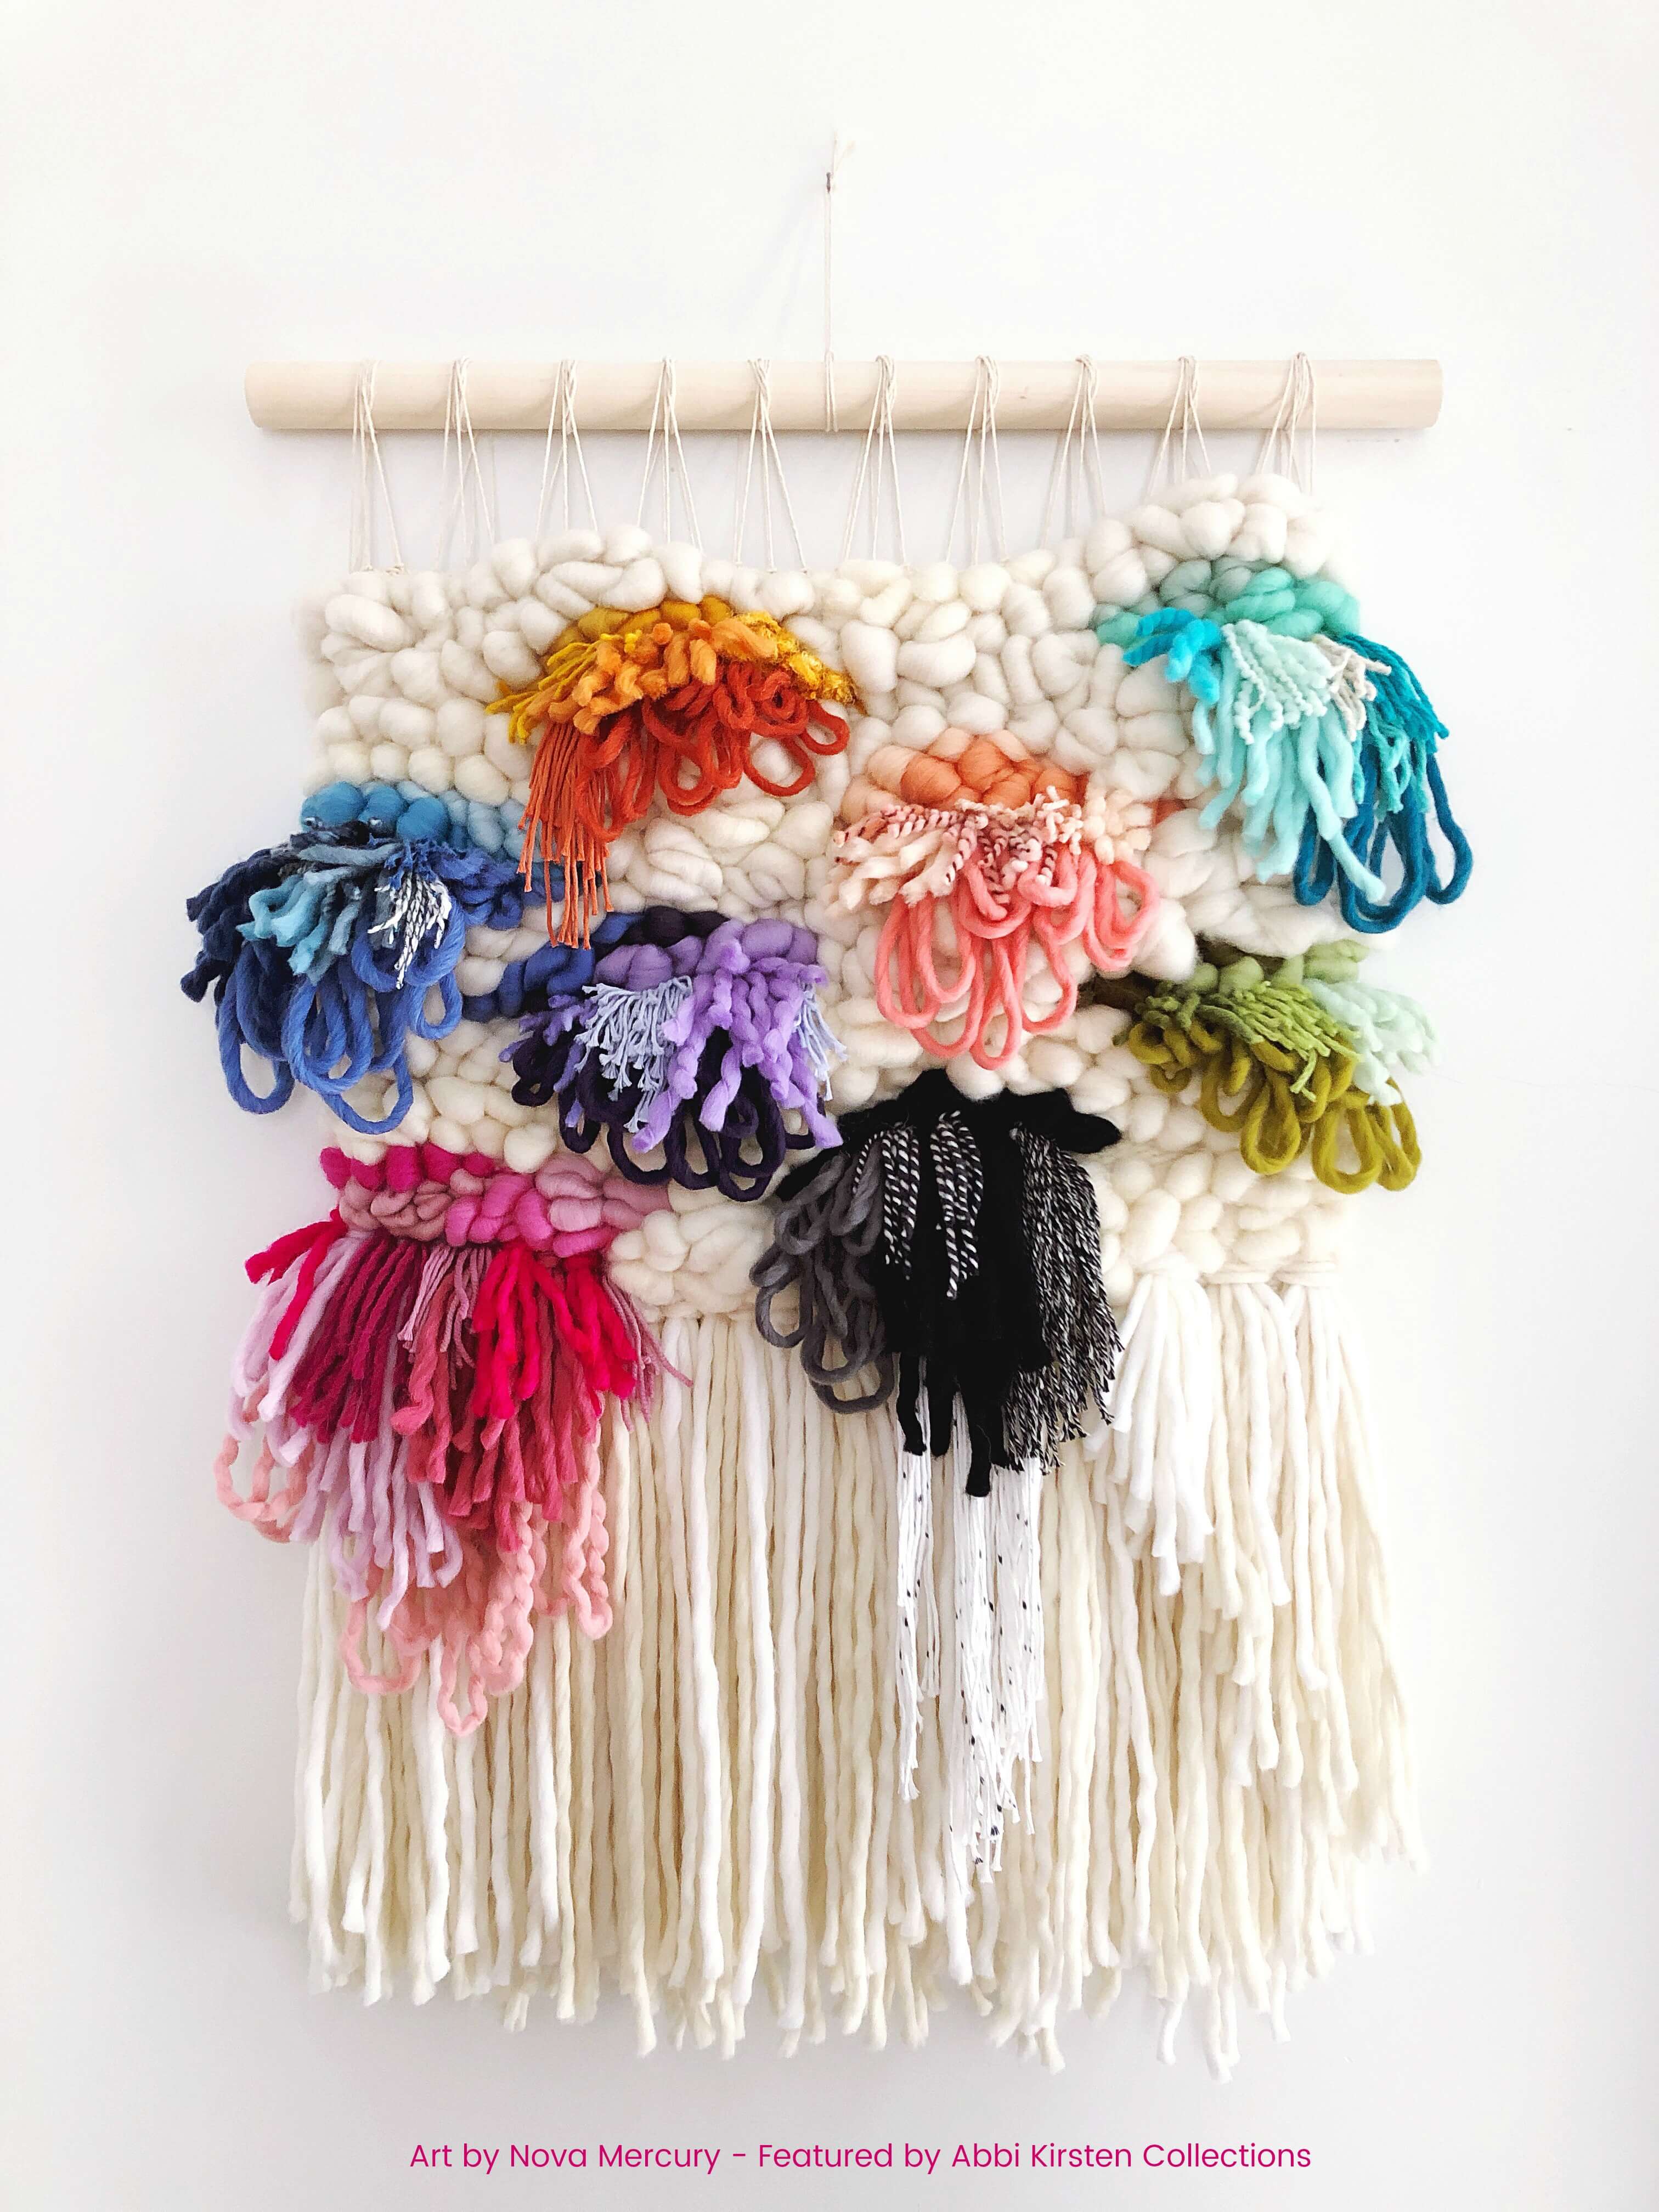 A large, colorful modern macrame wall hanging features pops of colorful threads  against the cream background. The macrame wall art hangs from a thick wooden dowel rod.